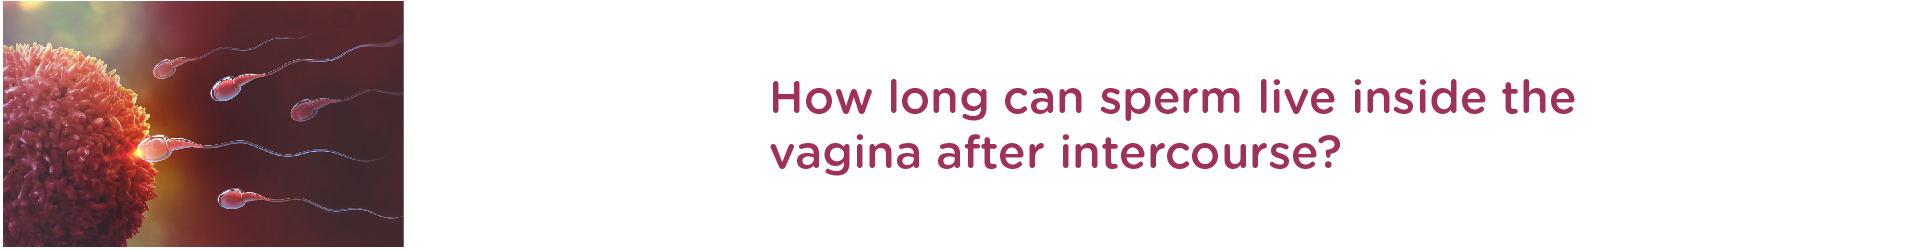 How Long Can Sperm Live Inside The Vagina After Intercourse?